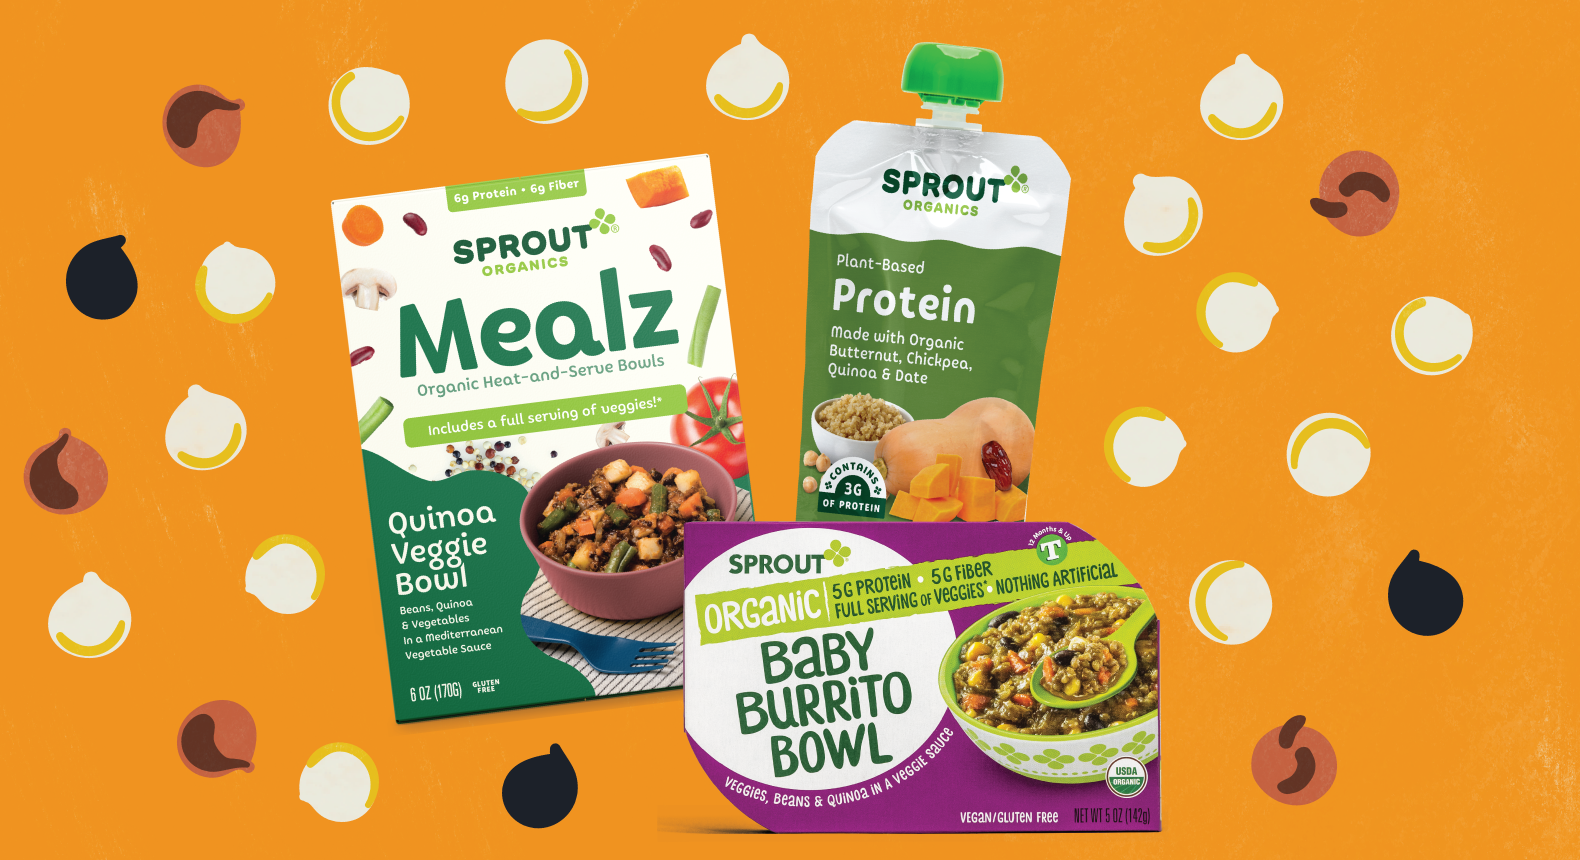 sprout organics quinoa products on an orange background